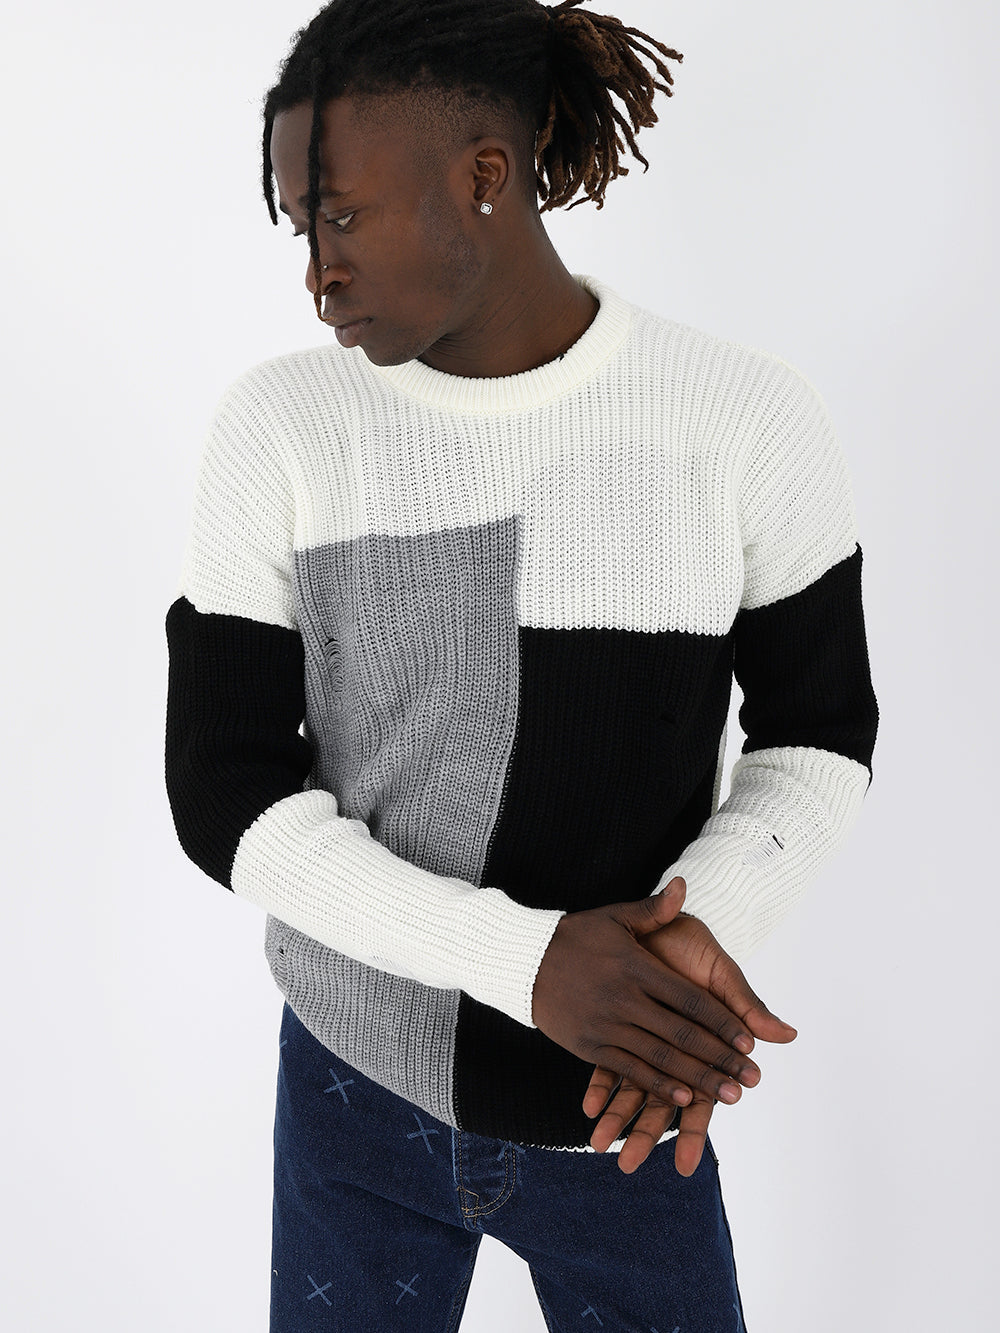 A man wearing a DISTRESSED GENTLEMAN SWEATER | MULTICOLOR made of 100% acrylic material.